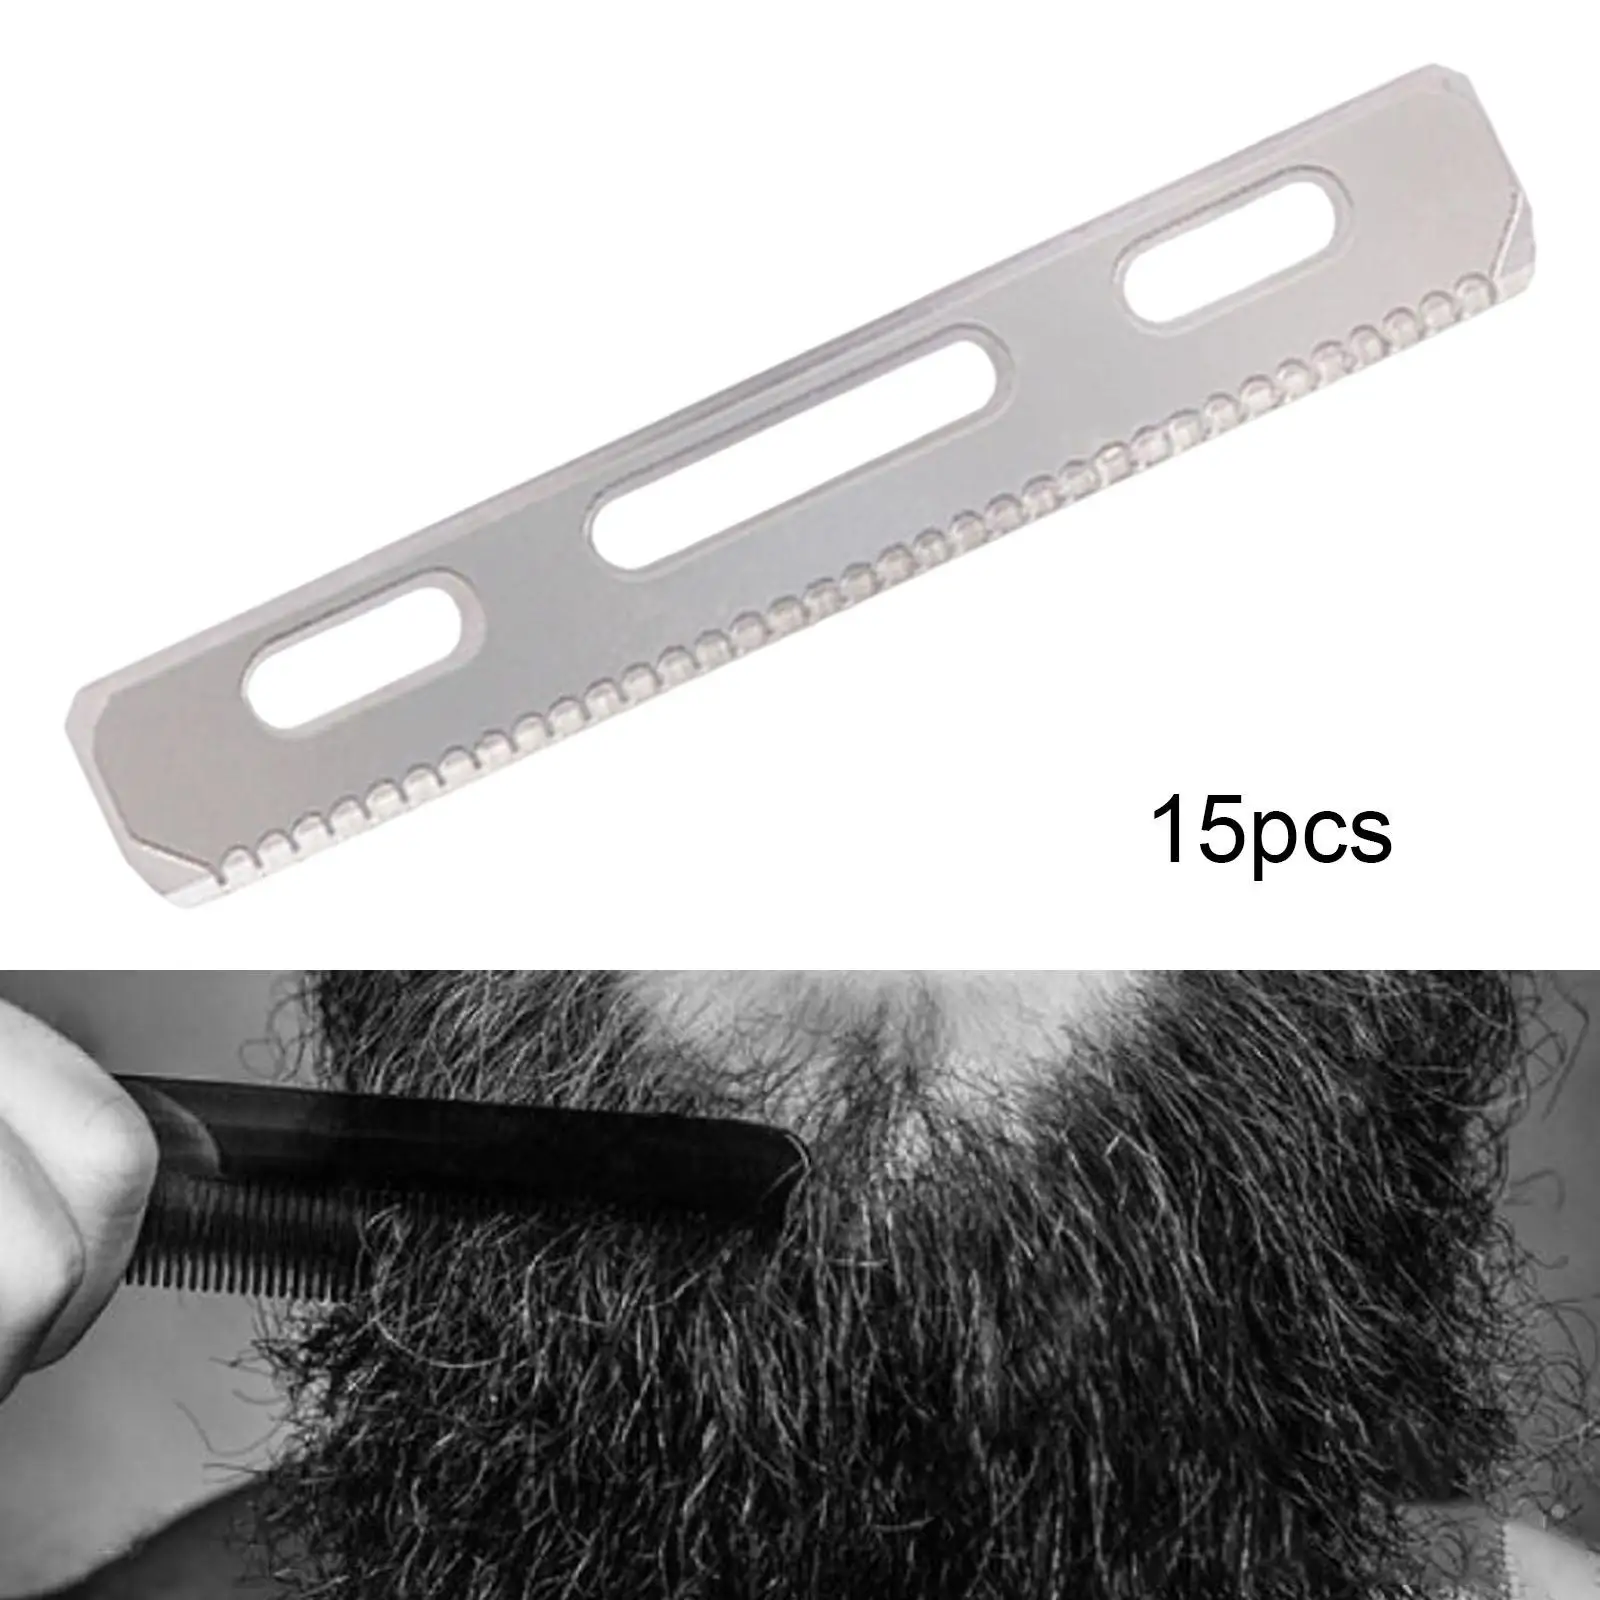 Eyebrow Trimmer Scraper Stainless Steel Makeup Eyebrow Eyebrow Shaping Shaver Knife hair Removal Women Men